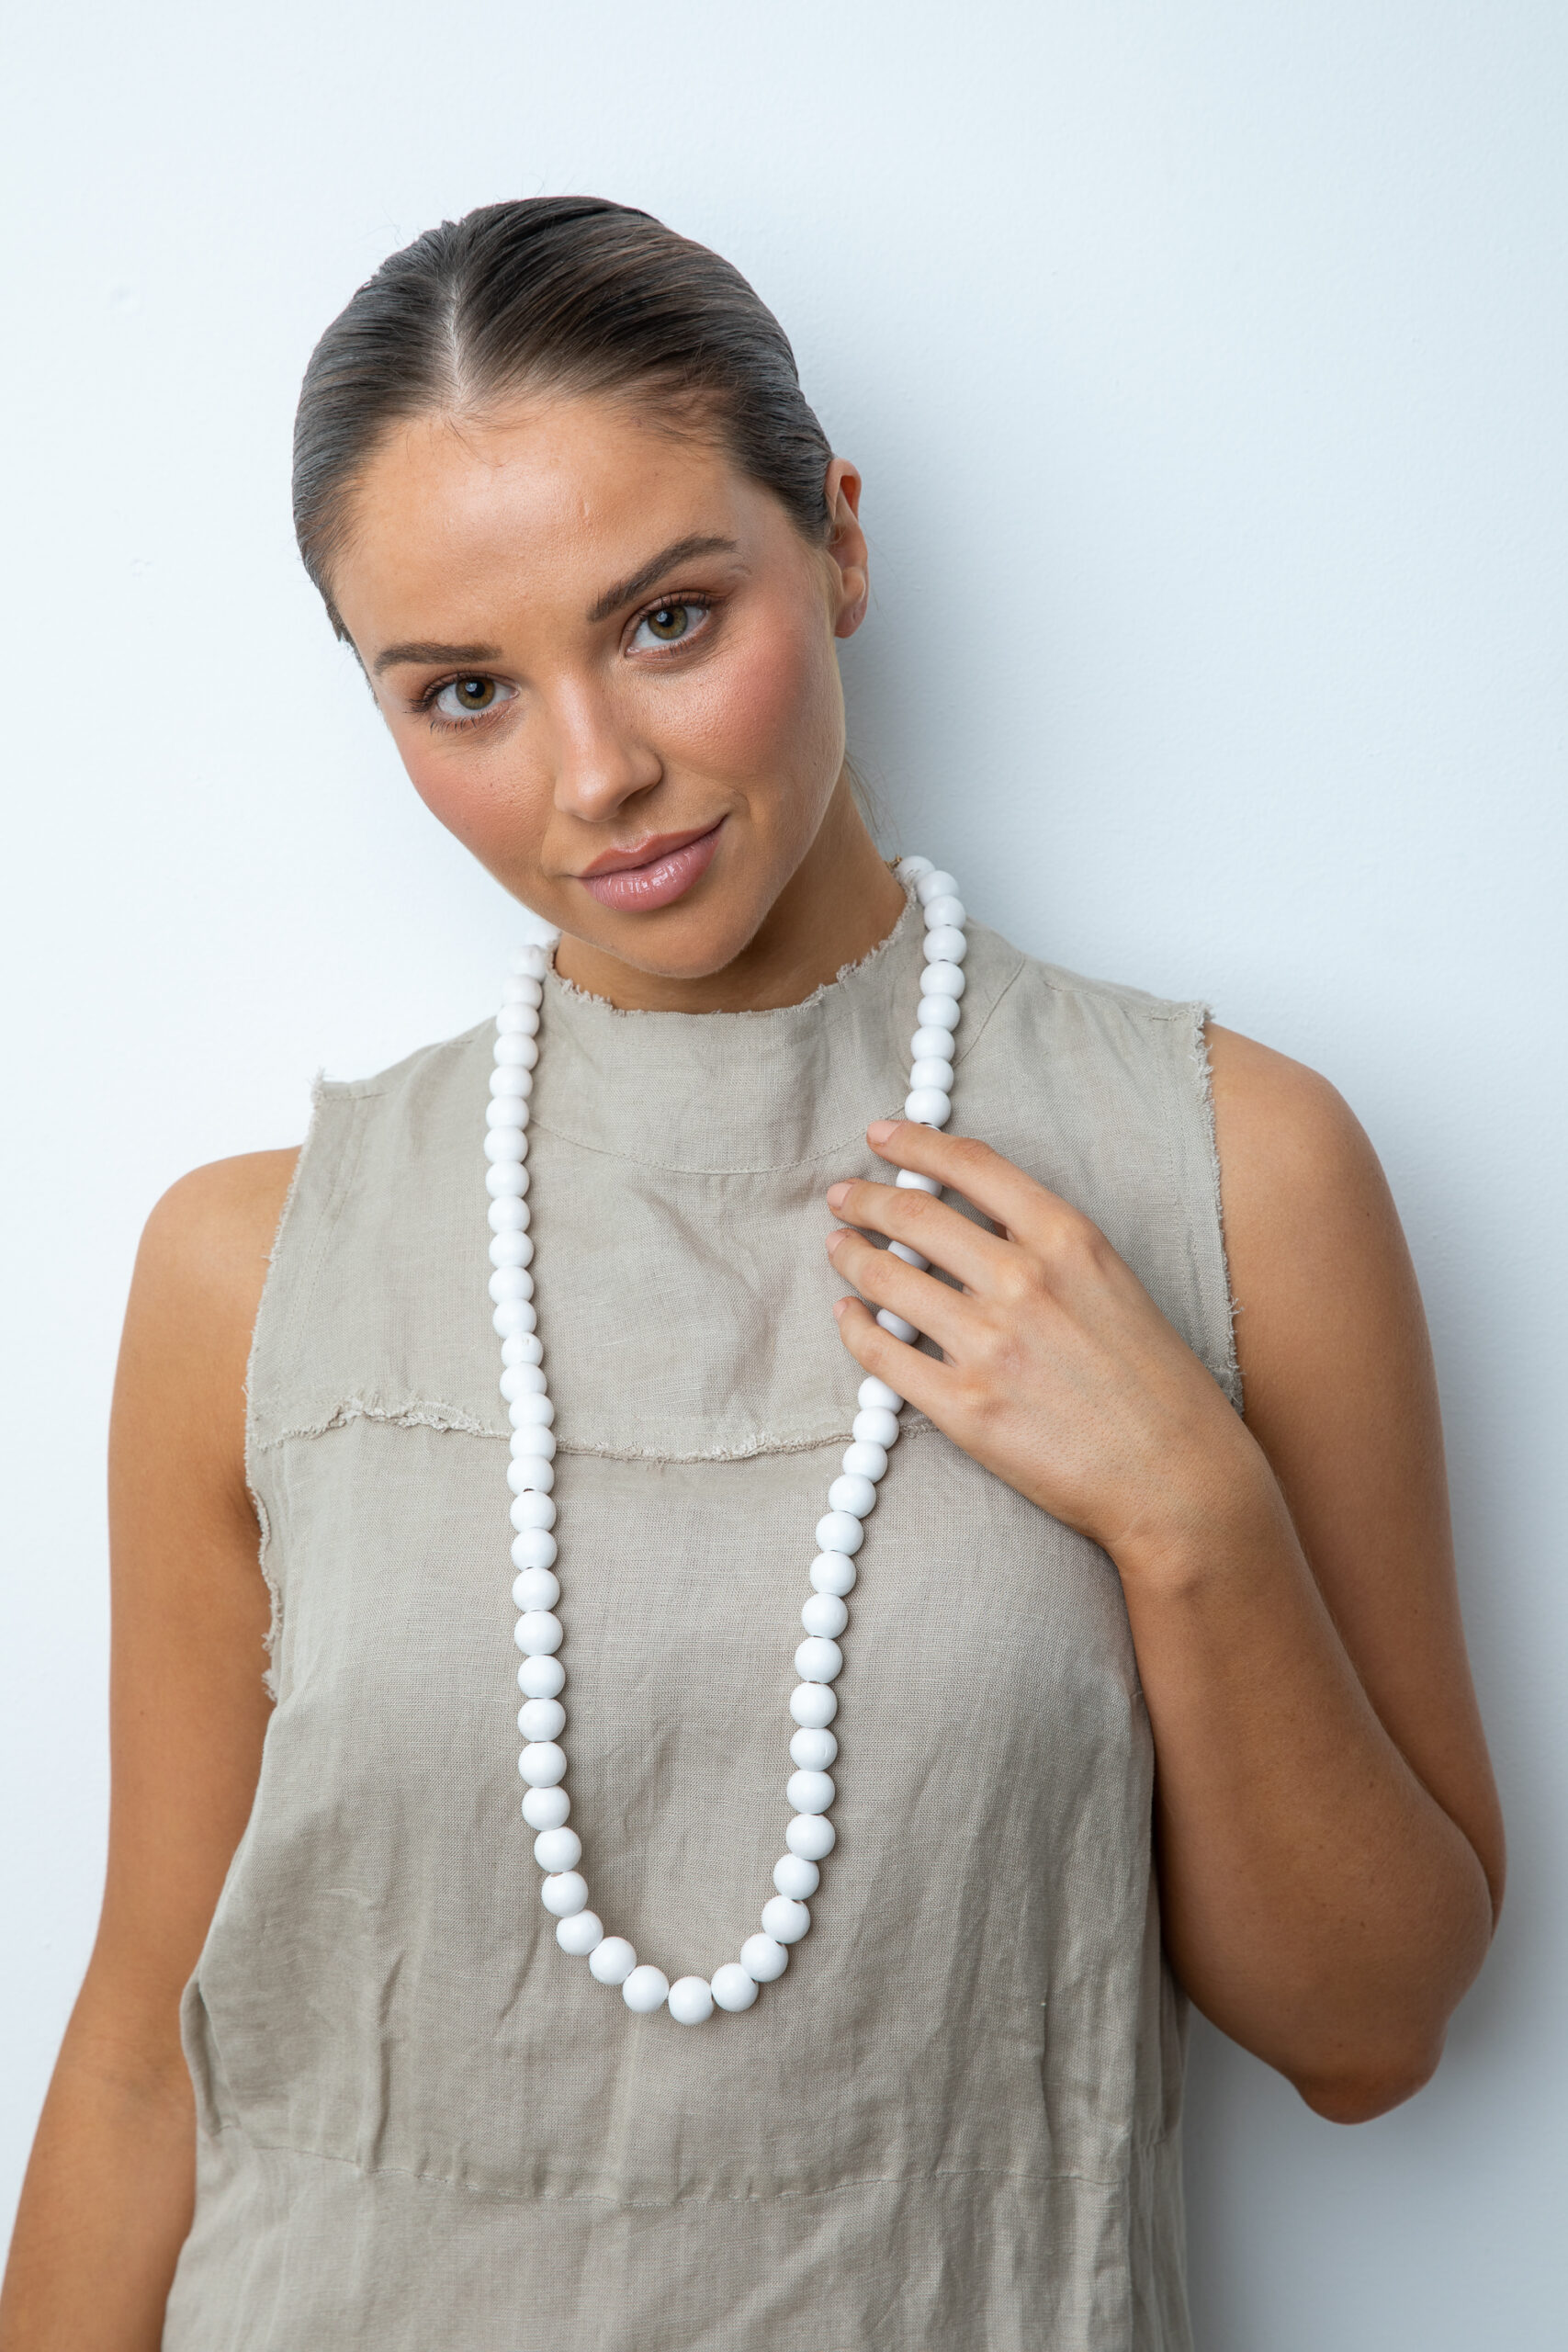 girl wearing a white wooden bead necklace